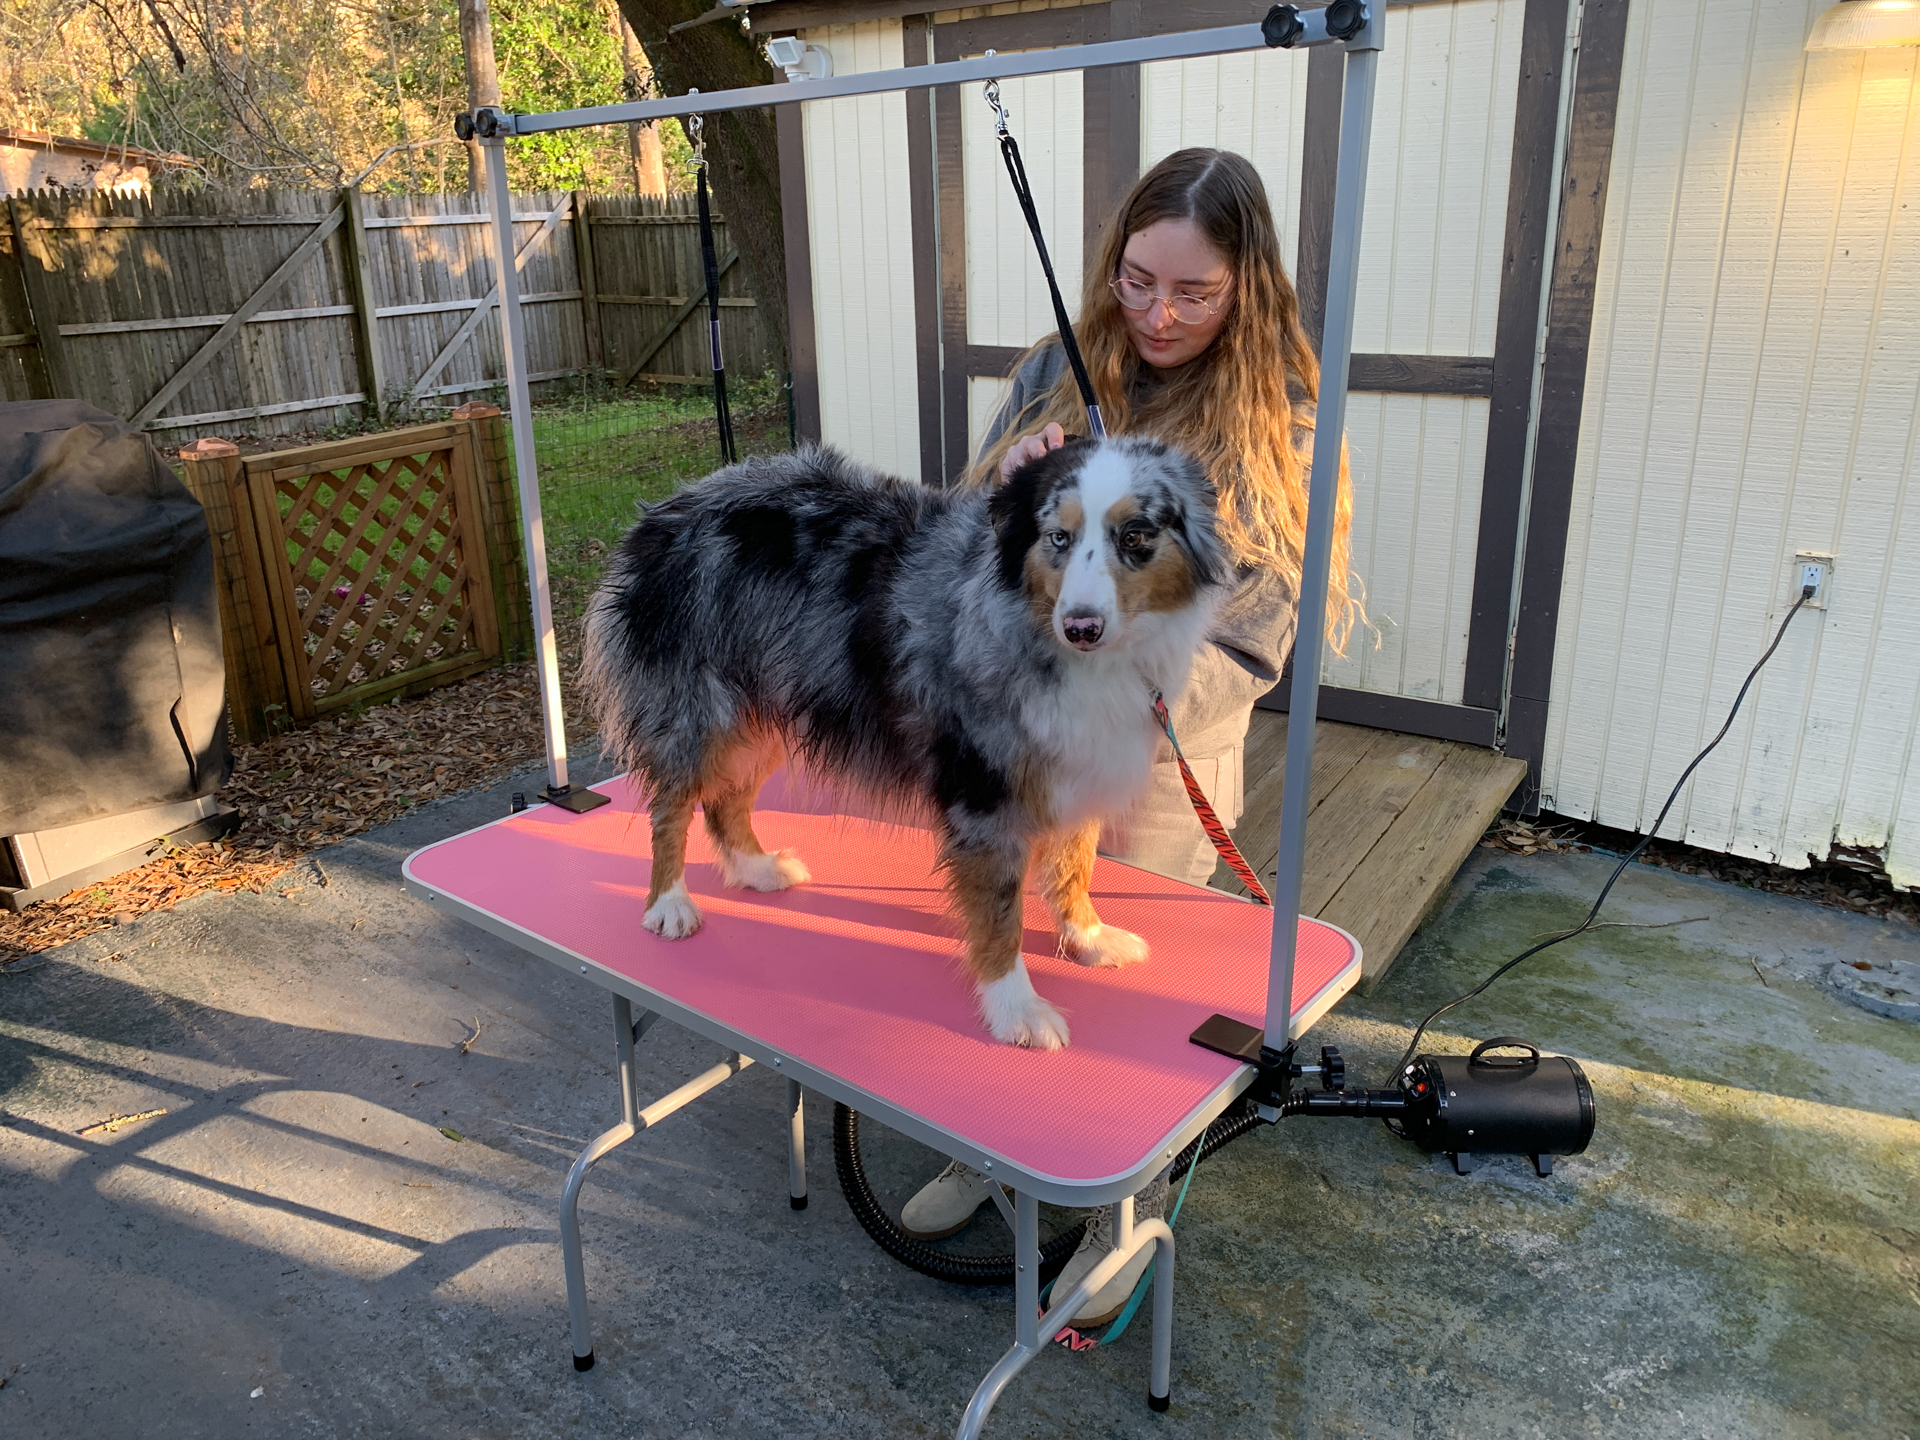 This is River, one of our grandpuppies, being groomed by our daughter, Summer. She is a blue merle Australian Shepherd.